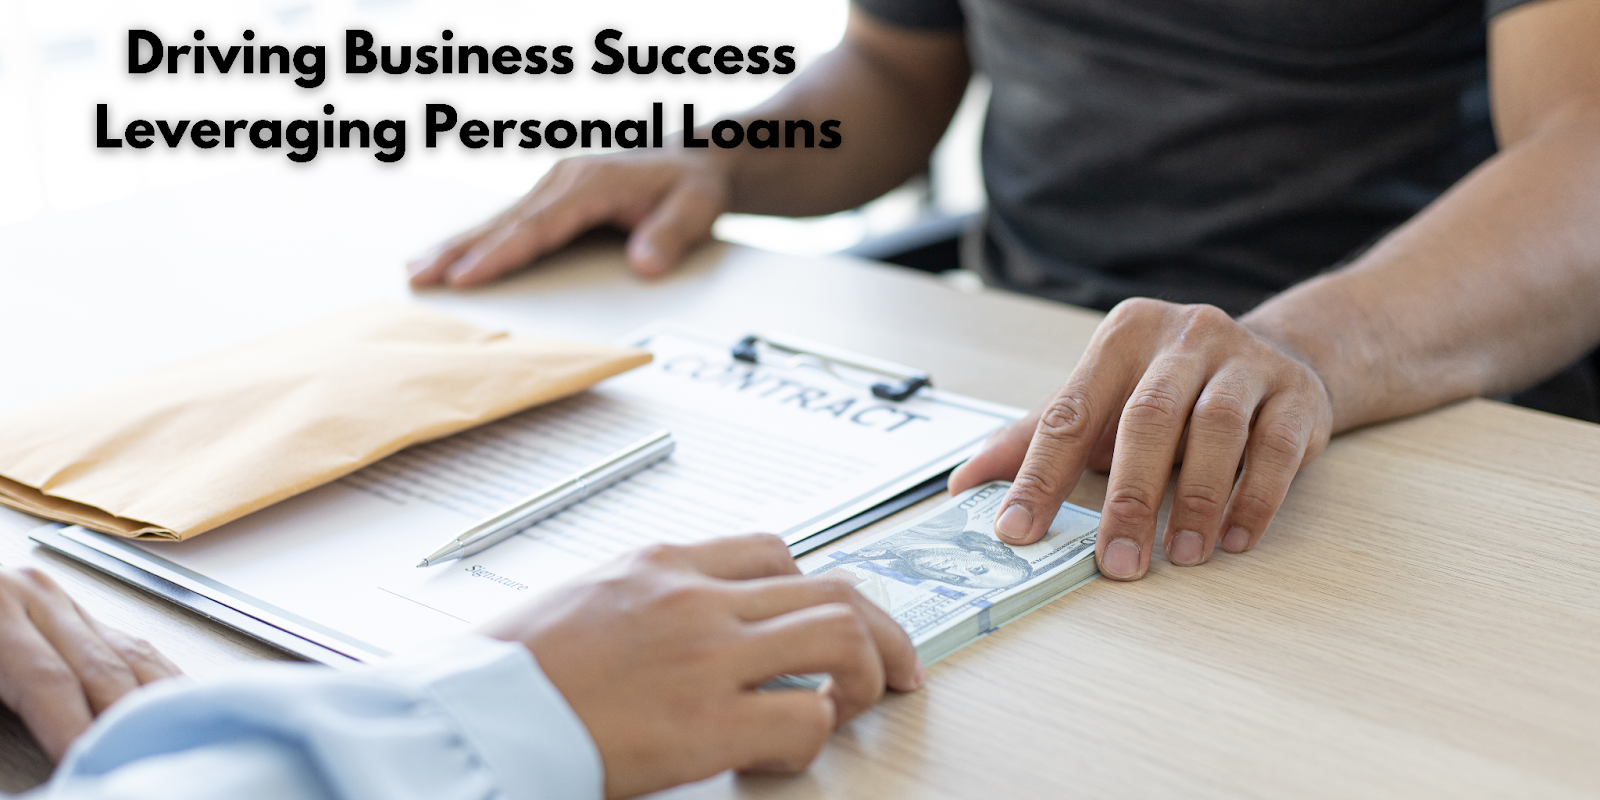 Driving Business Success: Leveraging Personal Loans